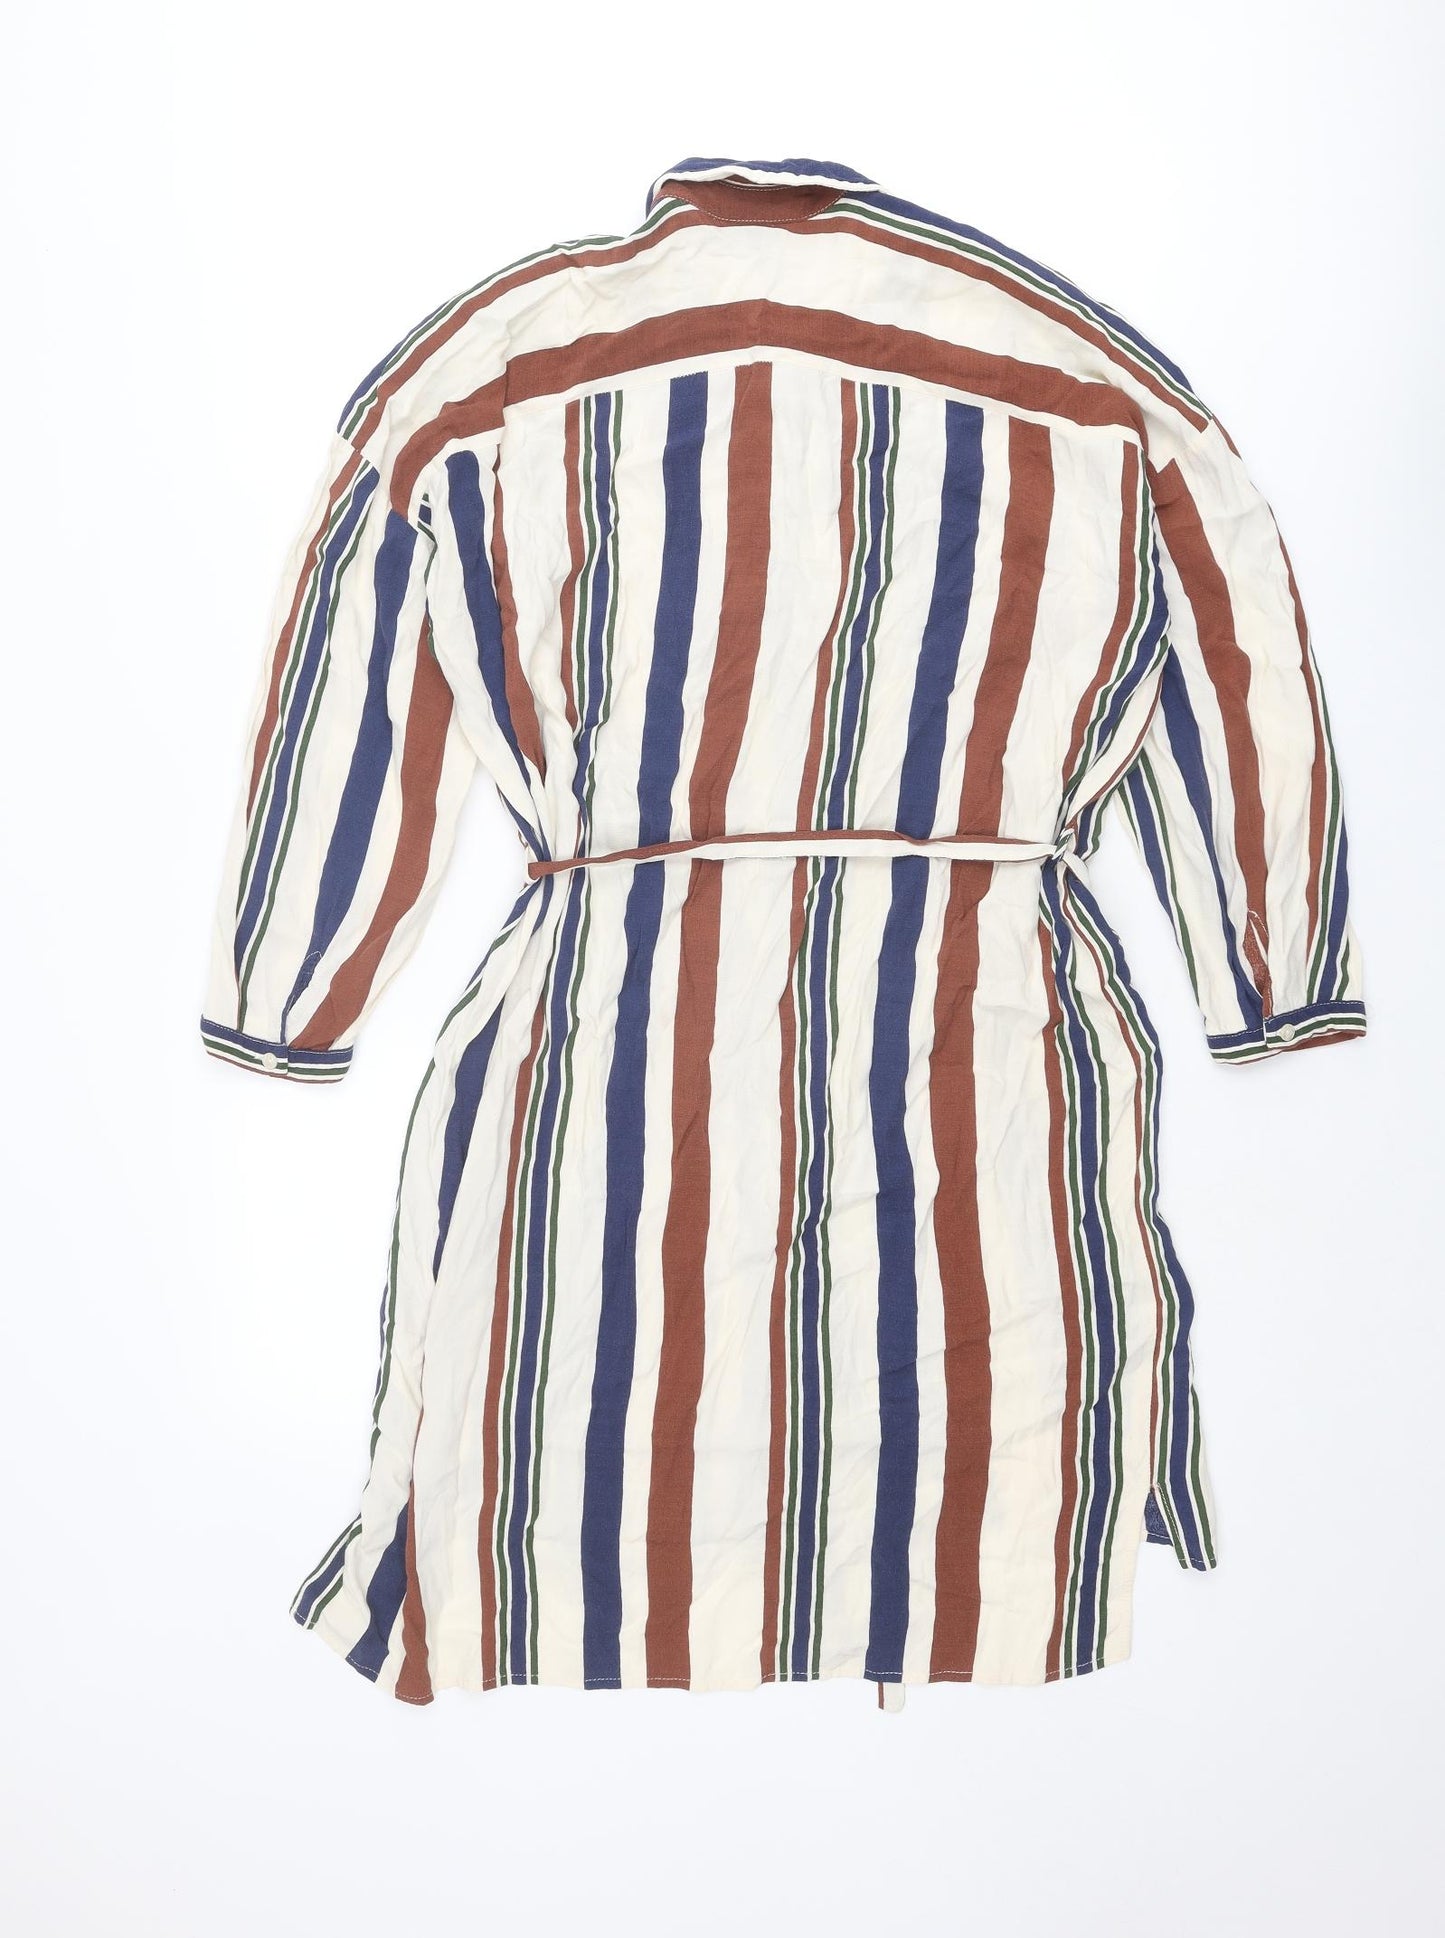 Topshop Womens Multicoloured Striped Viscose Shirt Dress Size 8 Collared Button